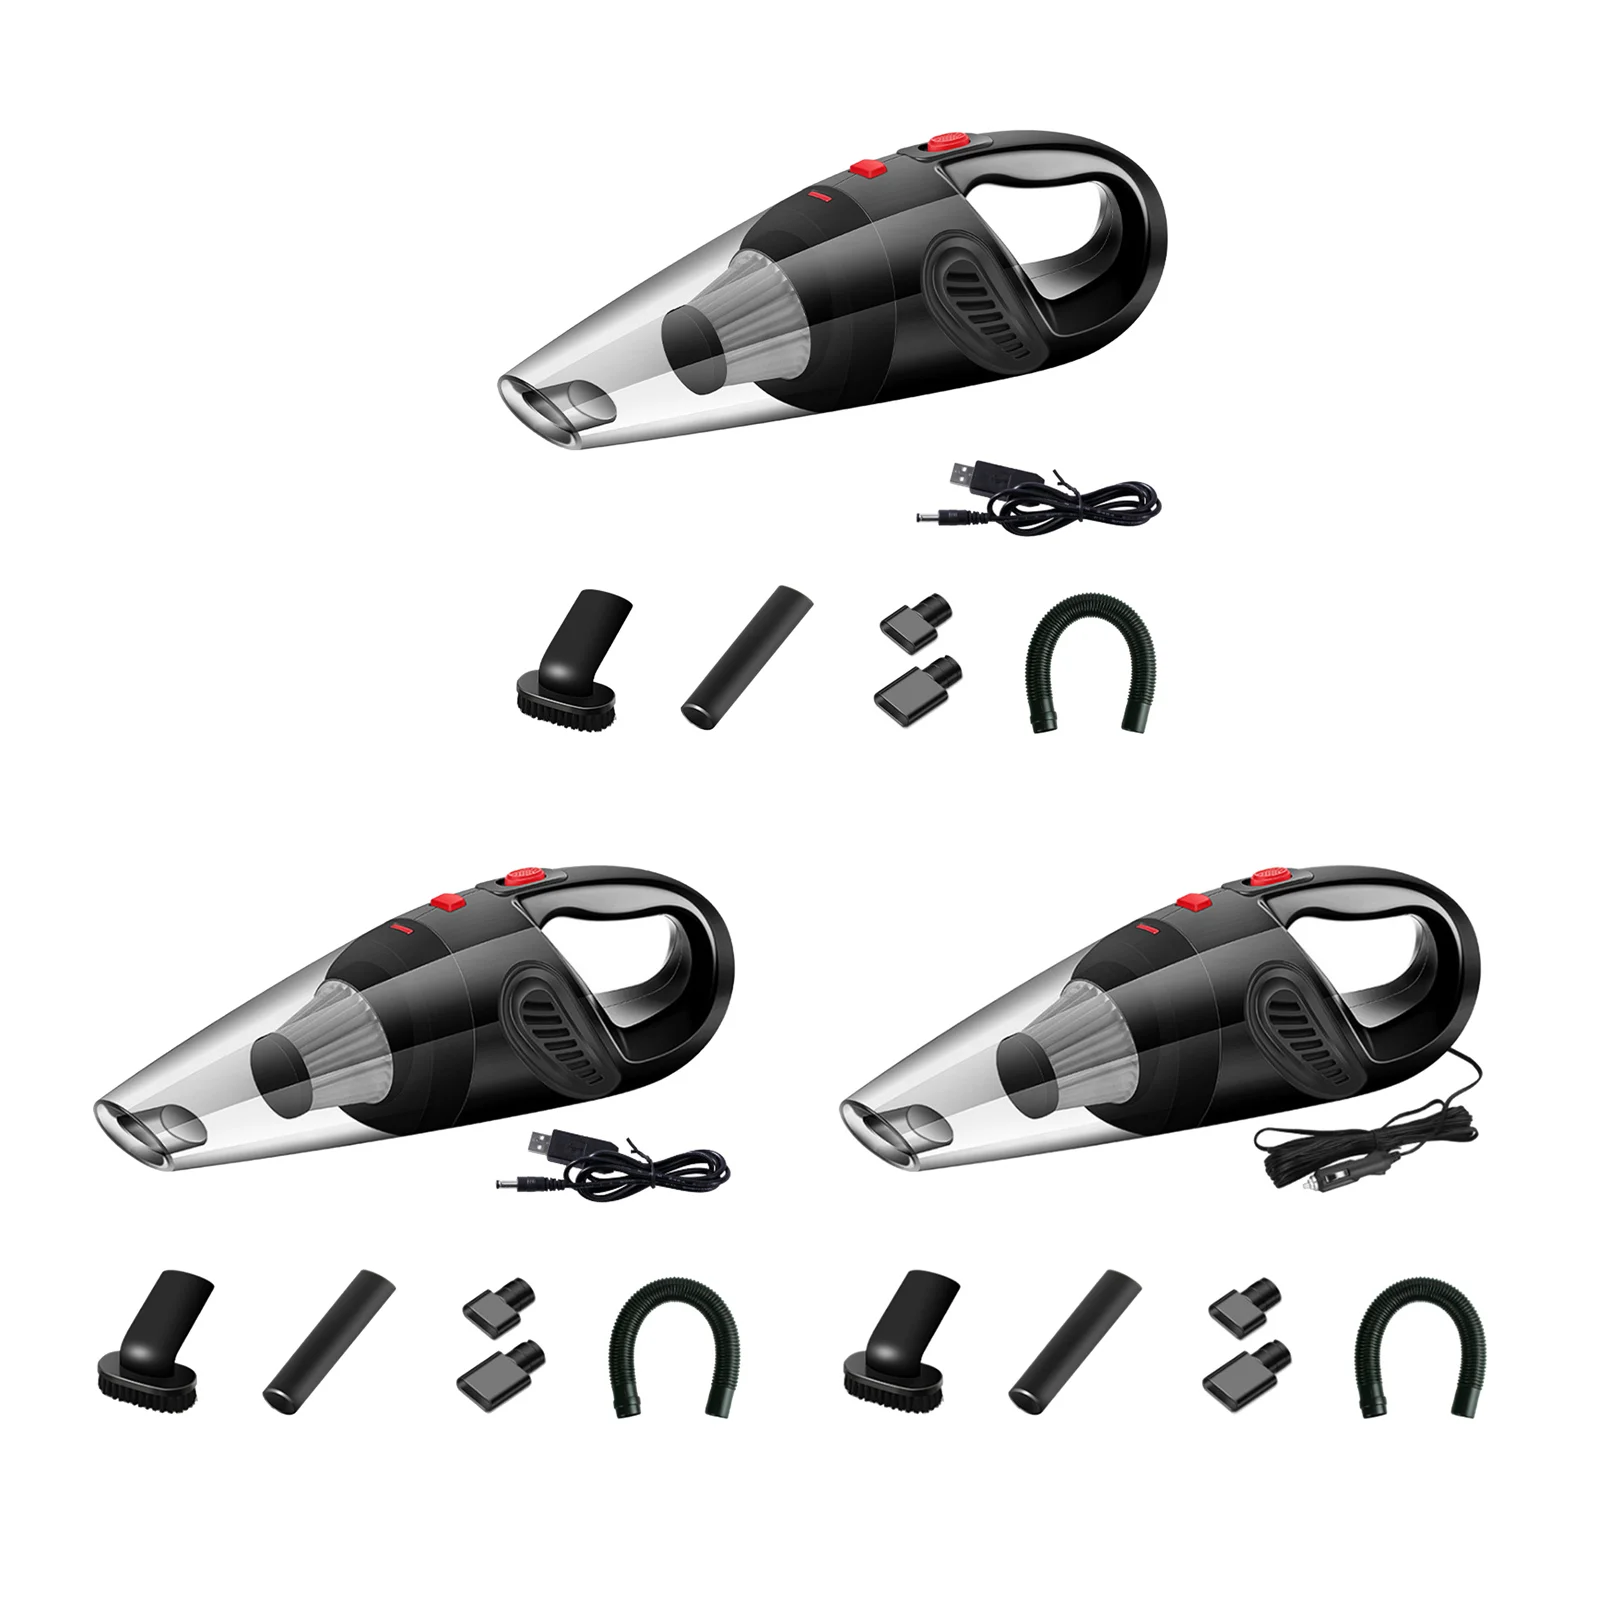 Car Vacuum Cleaner 4500PA 32000R/Min Auto Accessories Kit Handheld Fit for Home Use